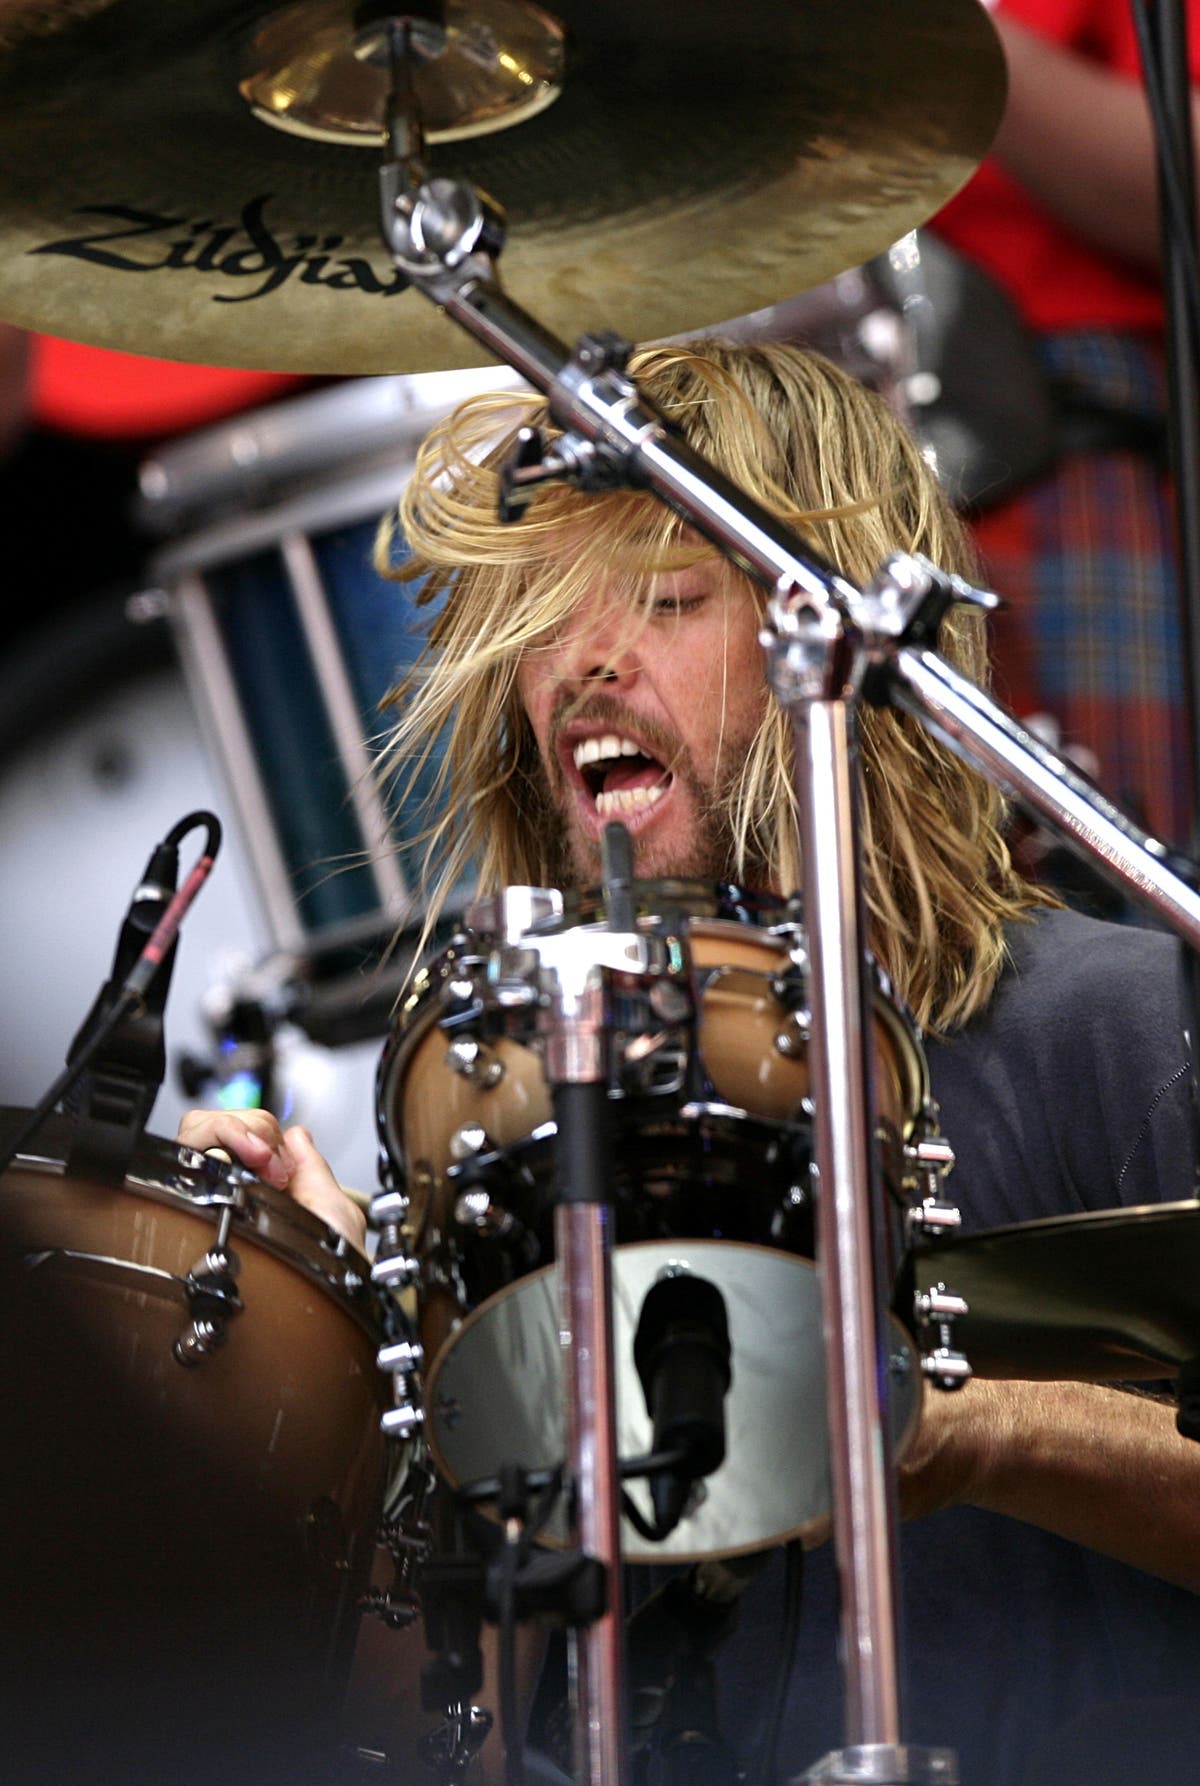 Taylor Hawkins had 10 different substances in his system, officials say